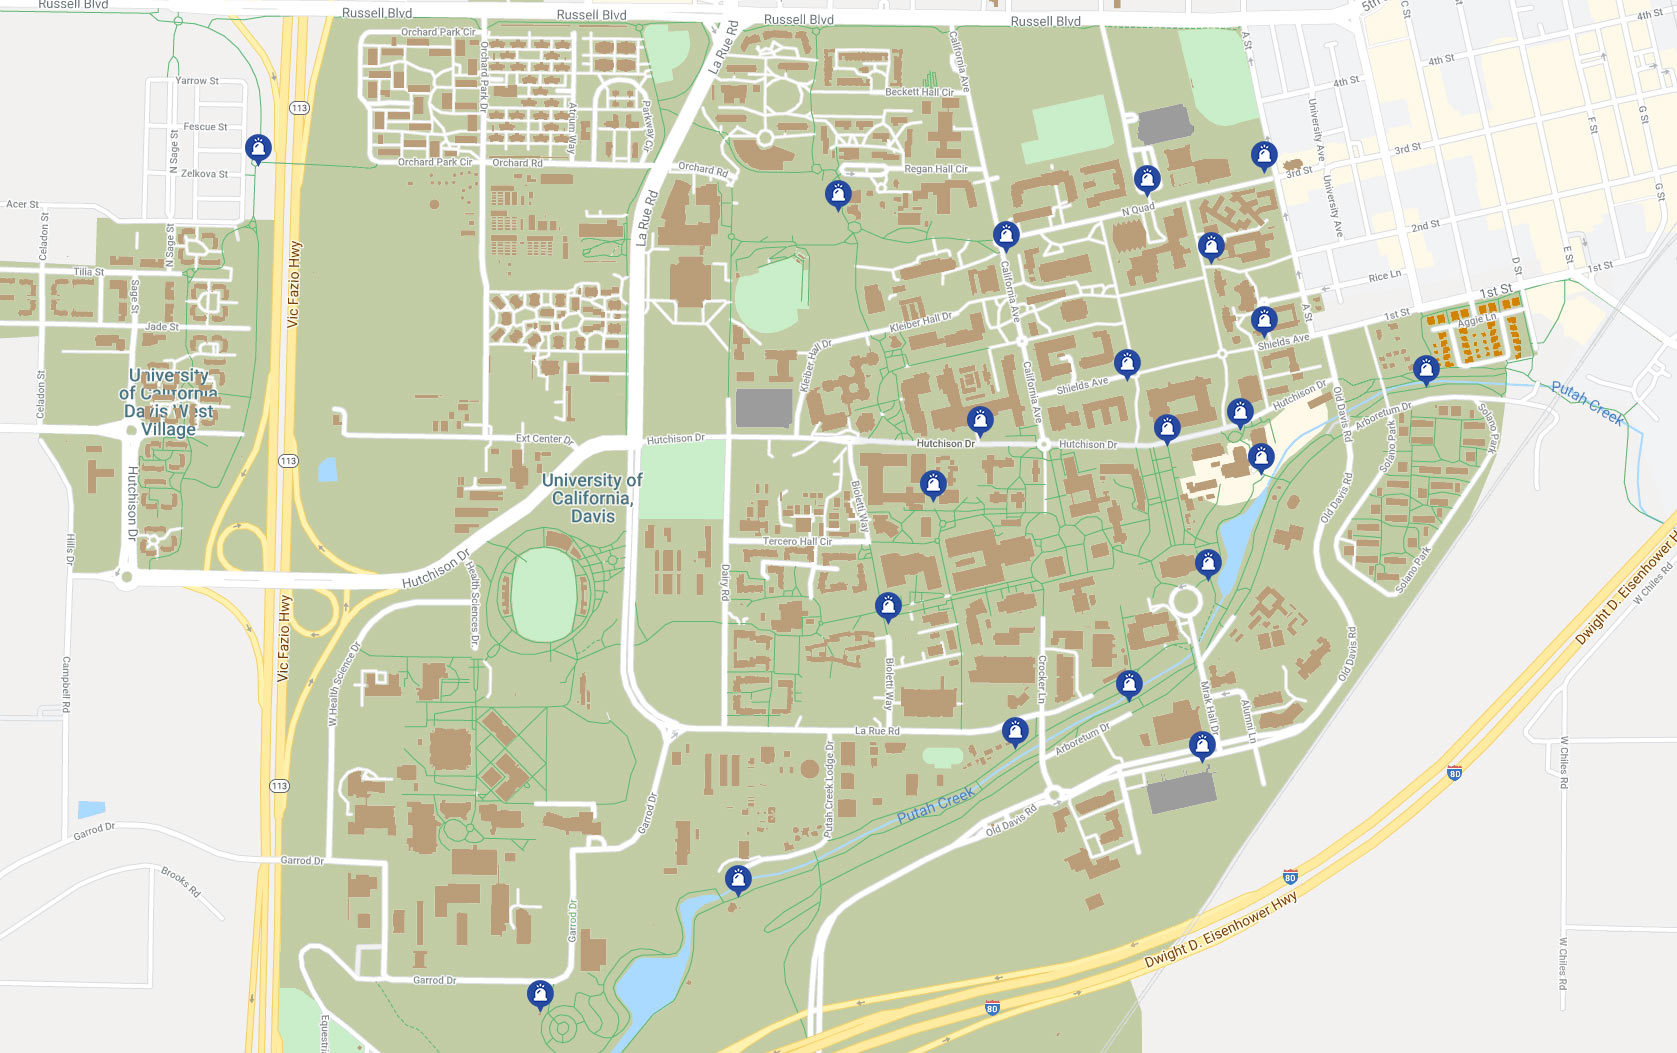 Campus map showing blue-light emergency call stations